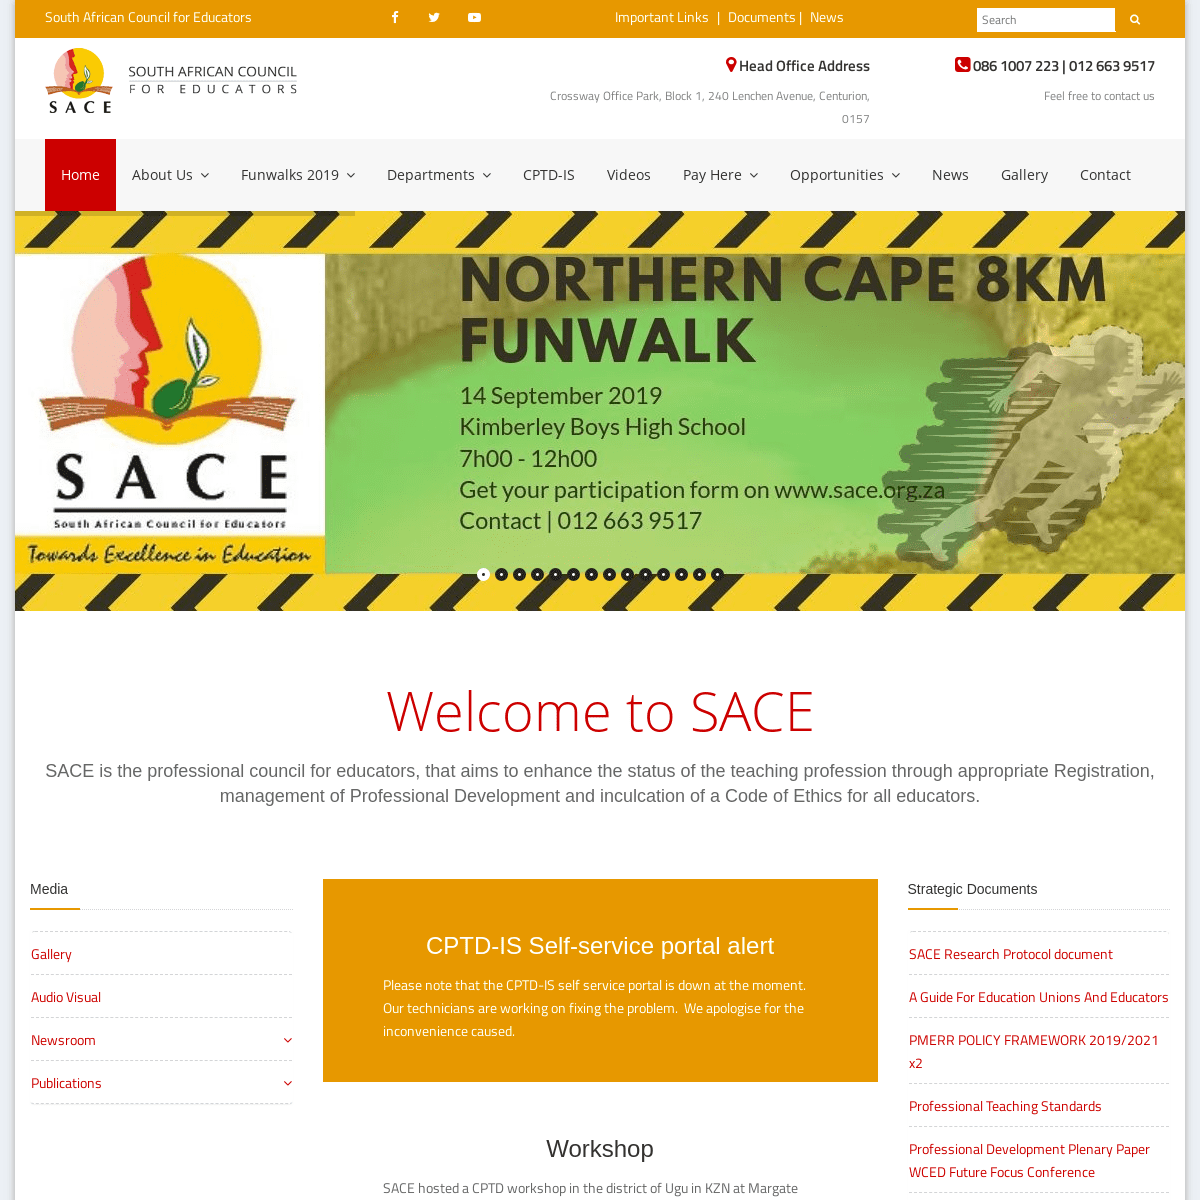 SACE | South African Council for Educators